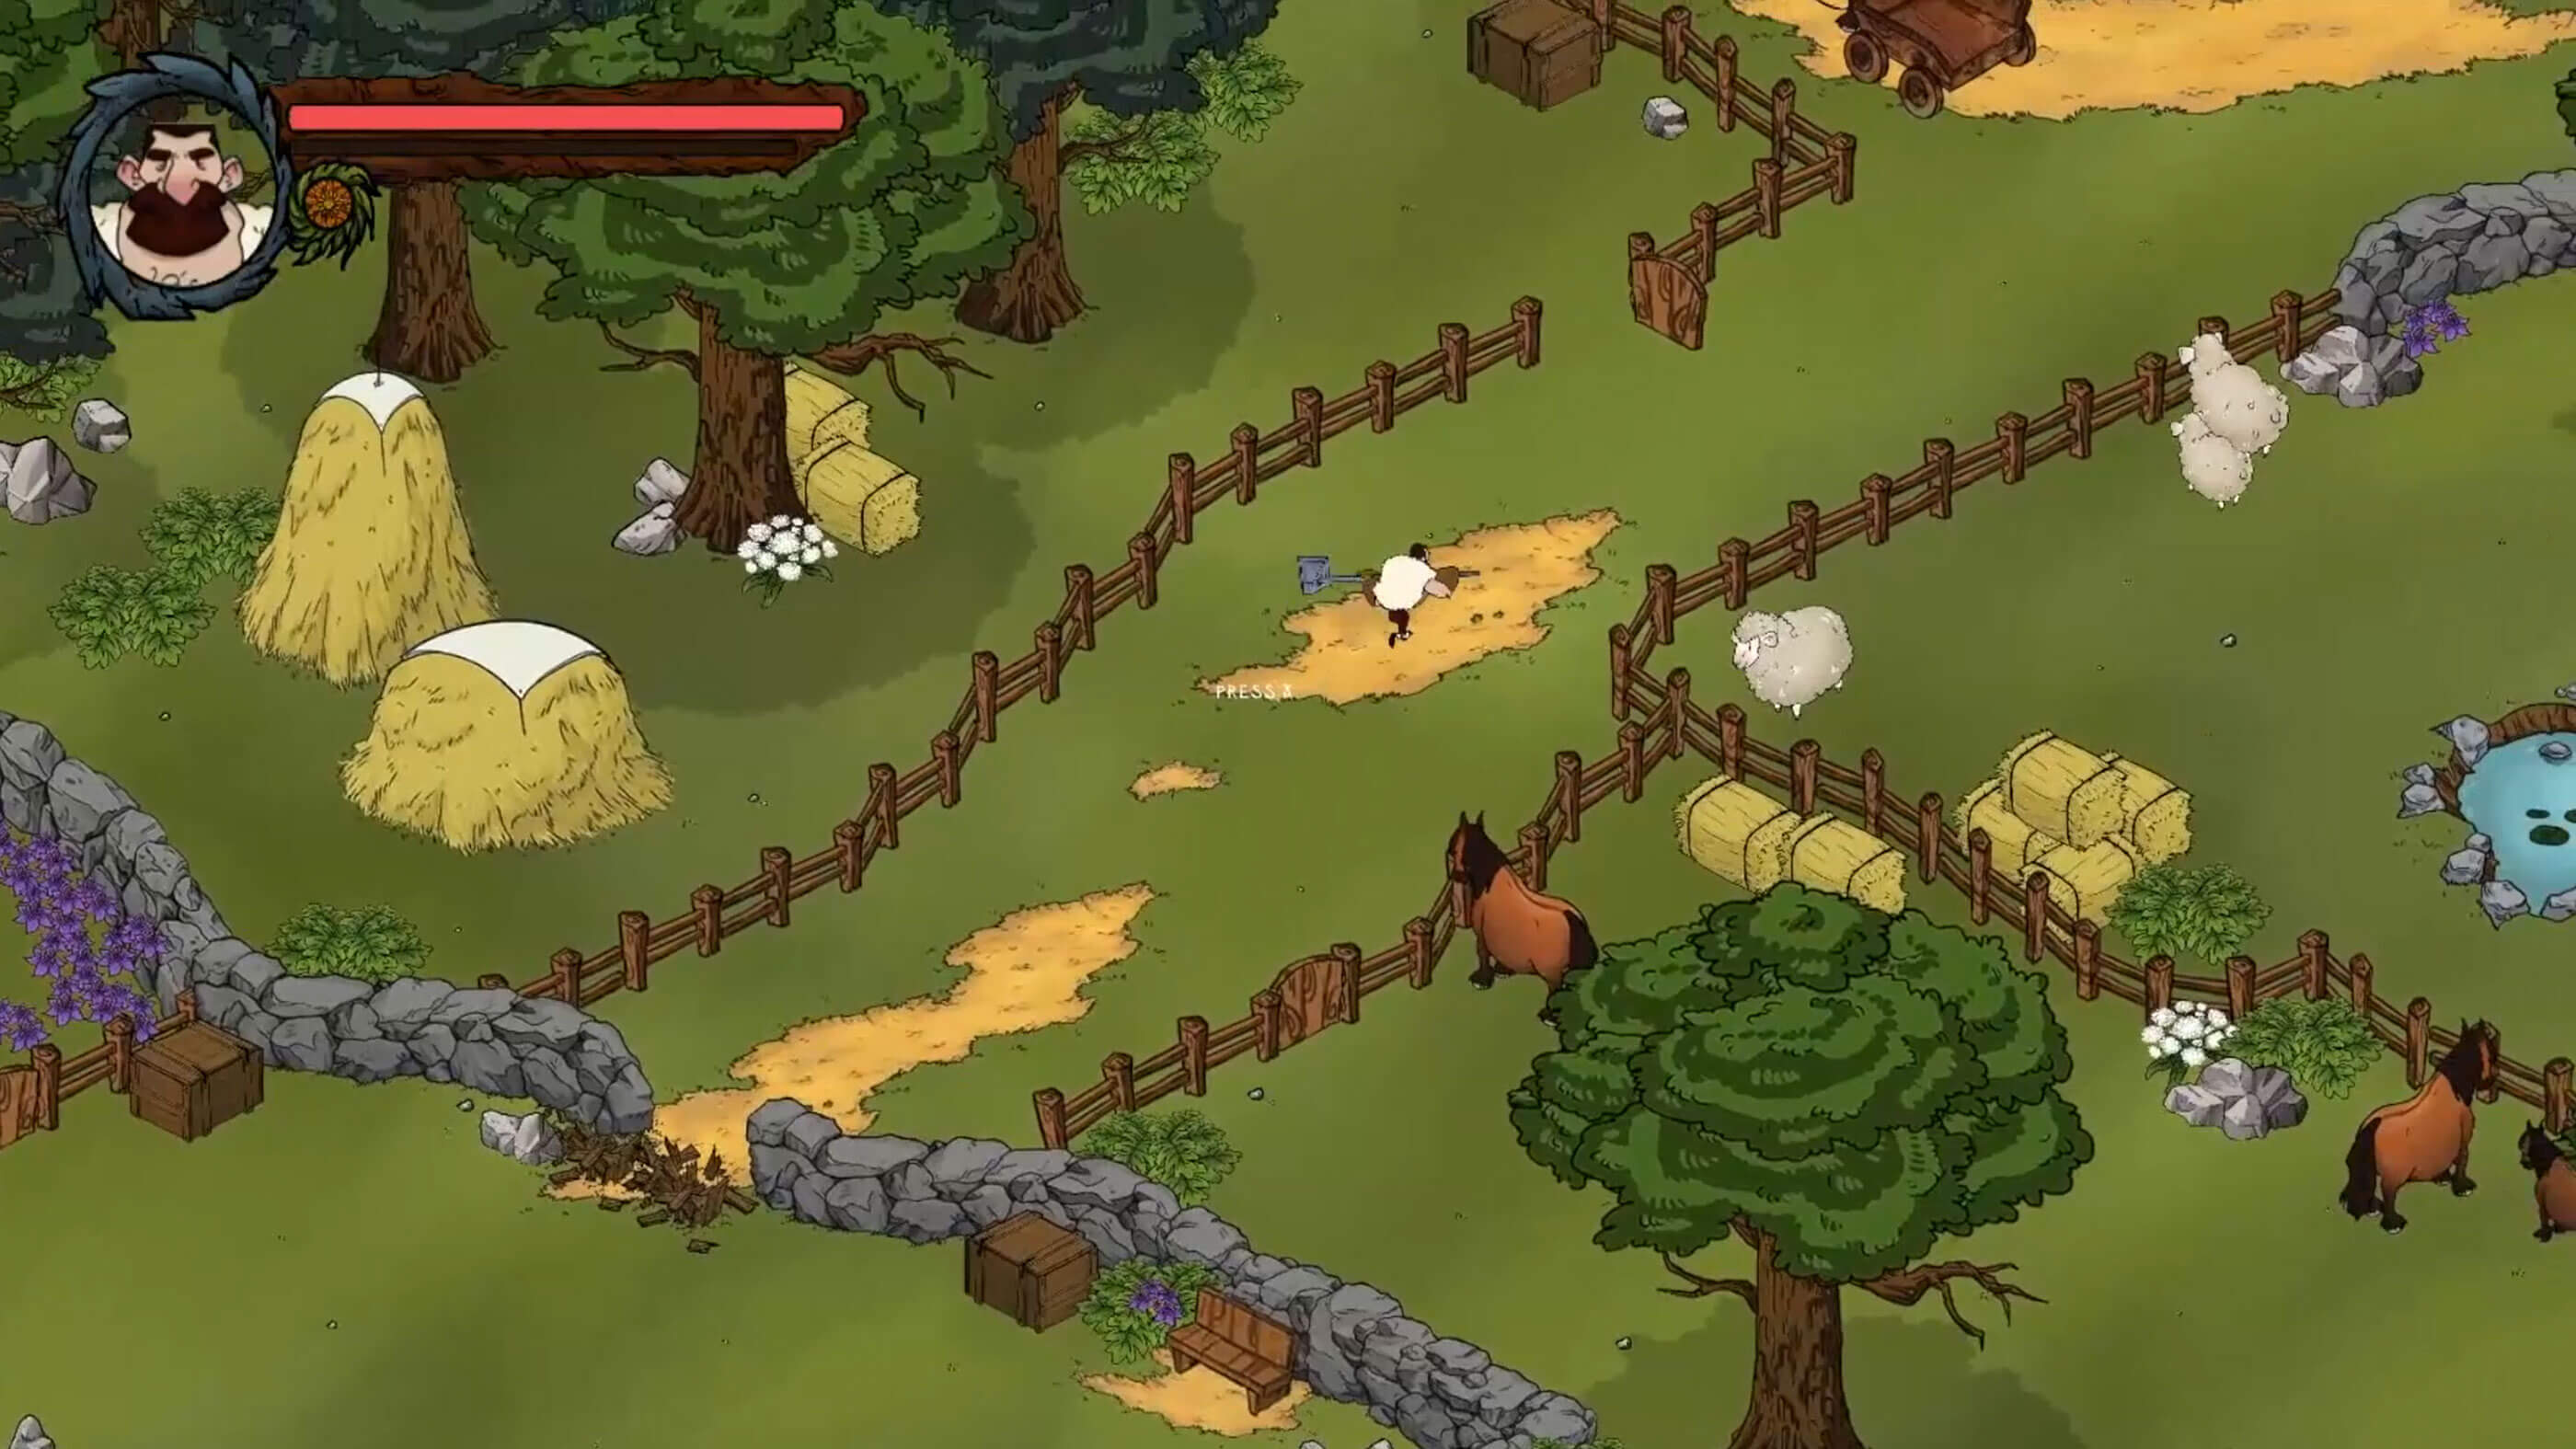 Isometric view of a player holding a large hatchet walking through a rural farm